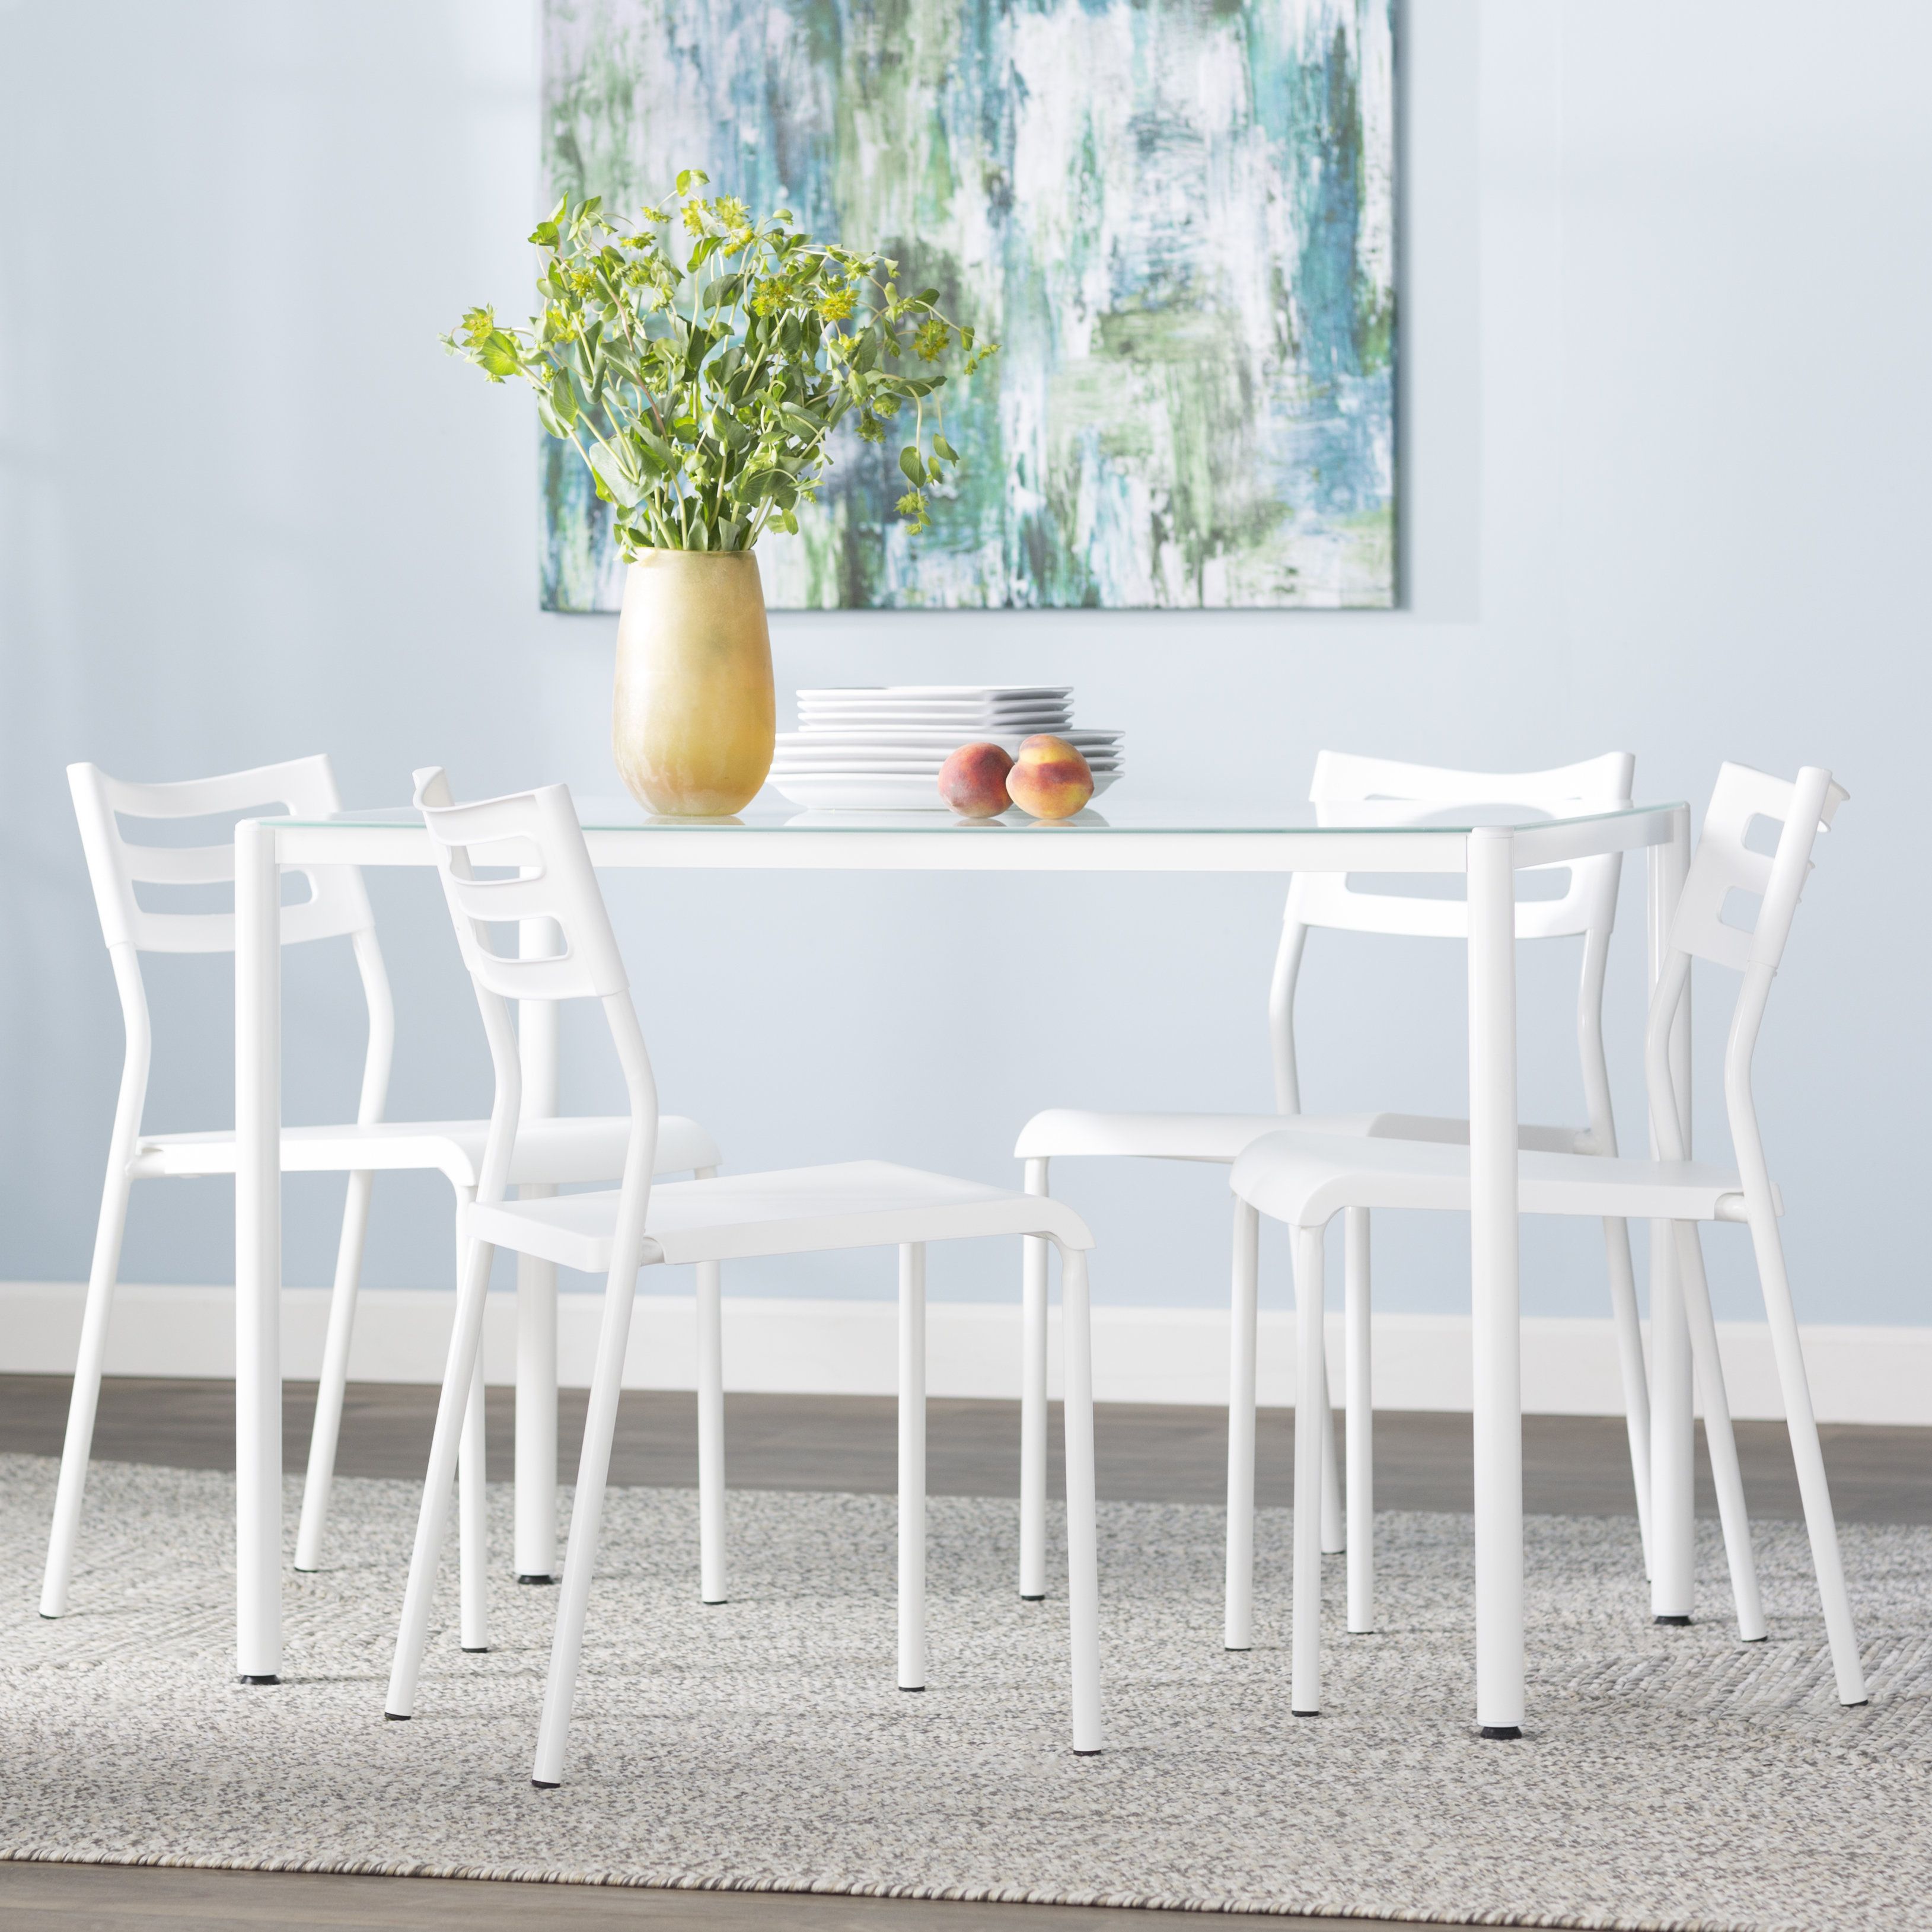 Wayfair With Liles 5 Piece Breakfast Nook Dining Sets (View 7 of 20)